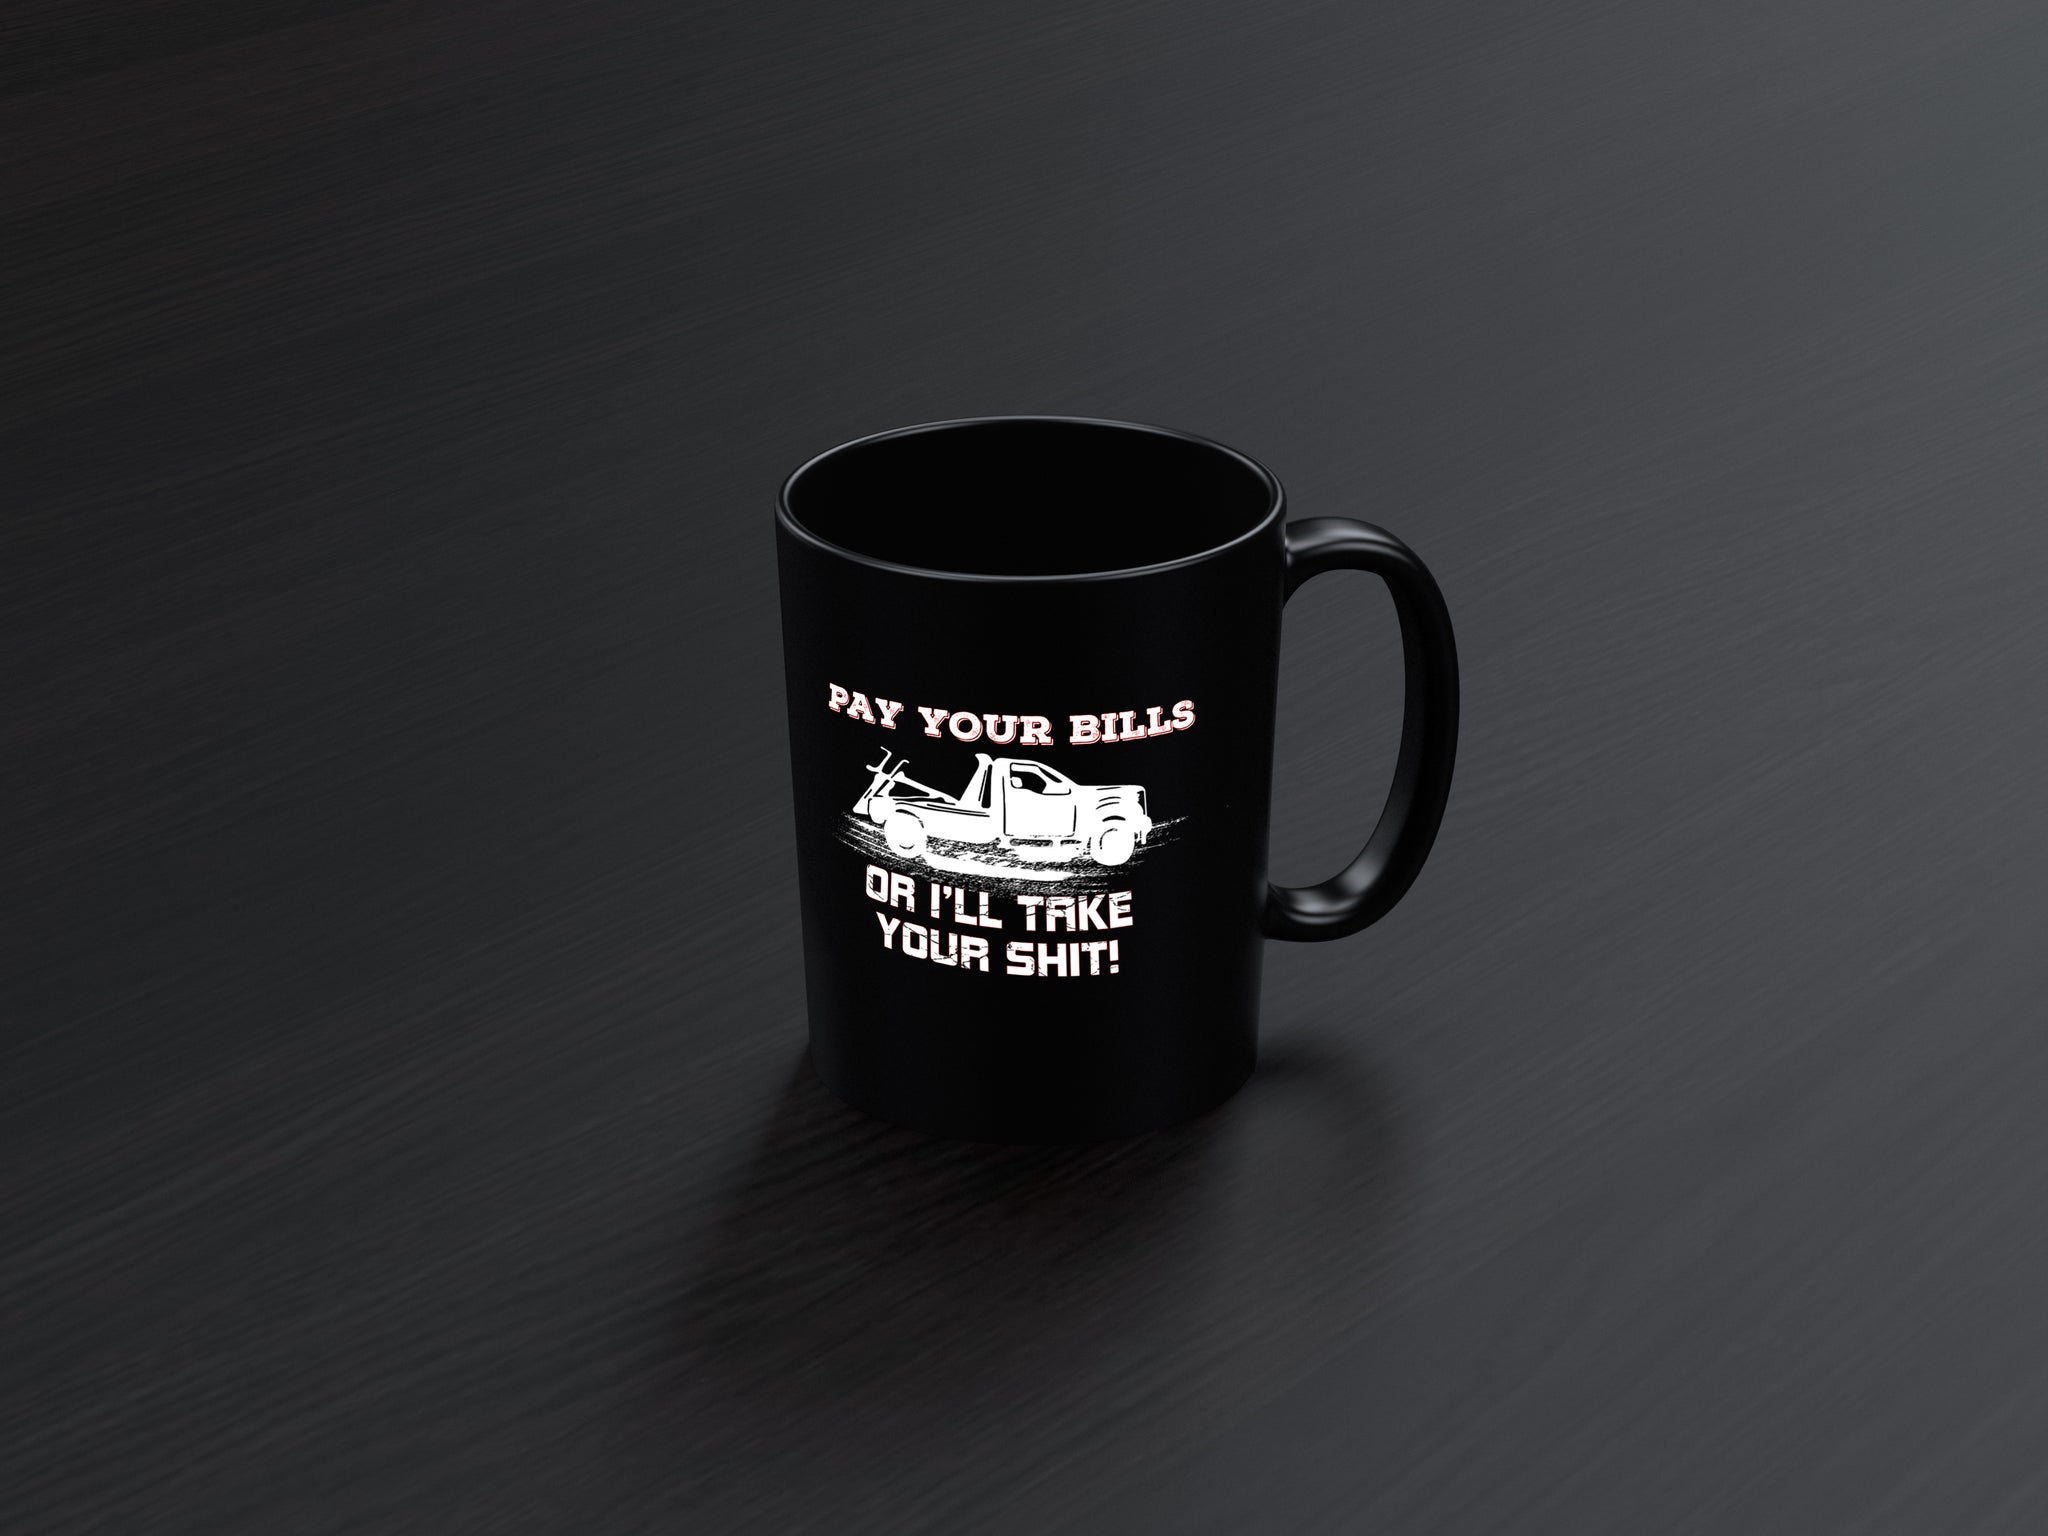 Skitongifts Funny Ceramic Coffee Mug For Birthday, Mother's Day, Father's Day, Christmas Pay Your Bills Or I'll Take Your Shit Repo